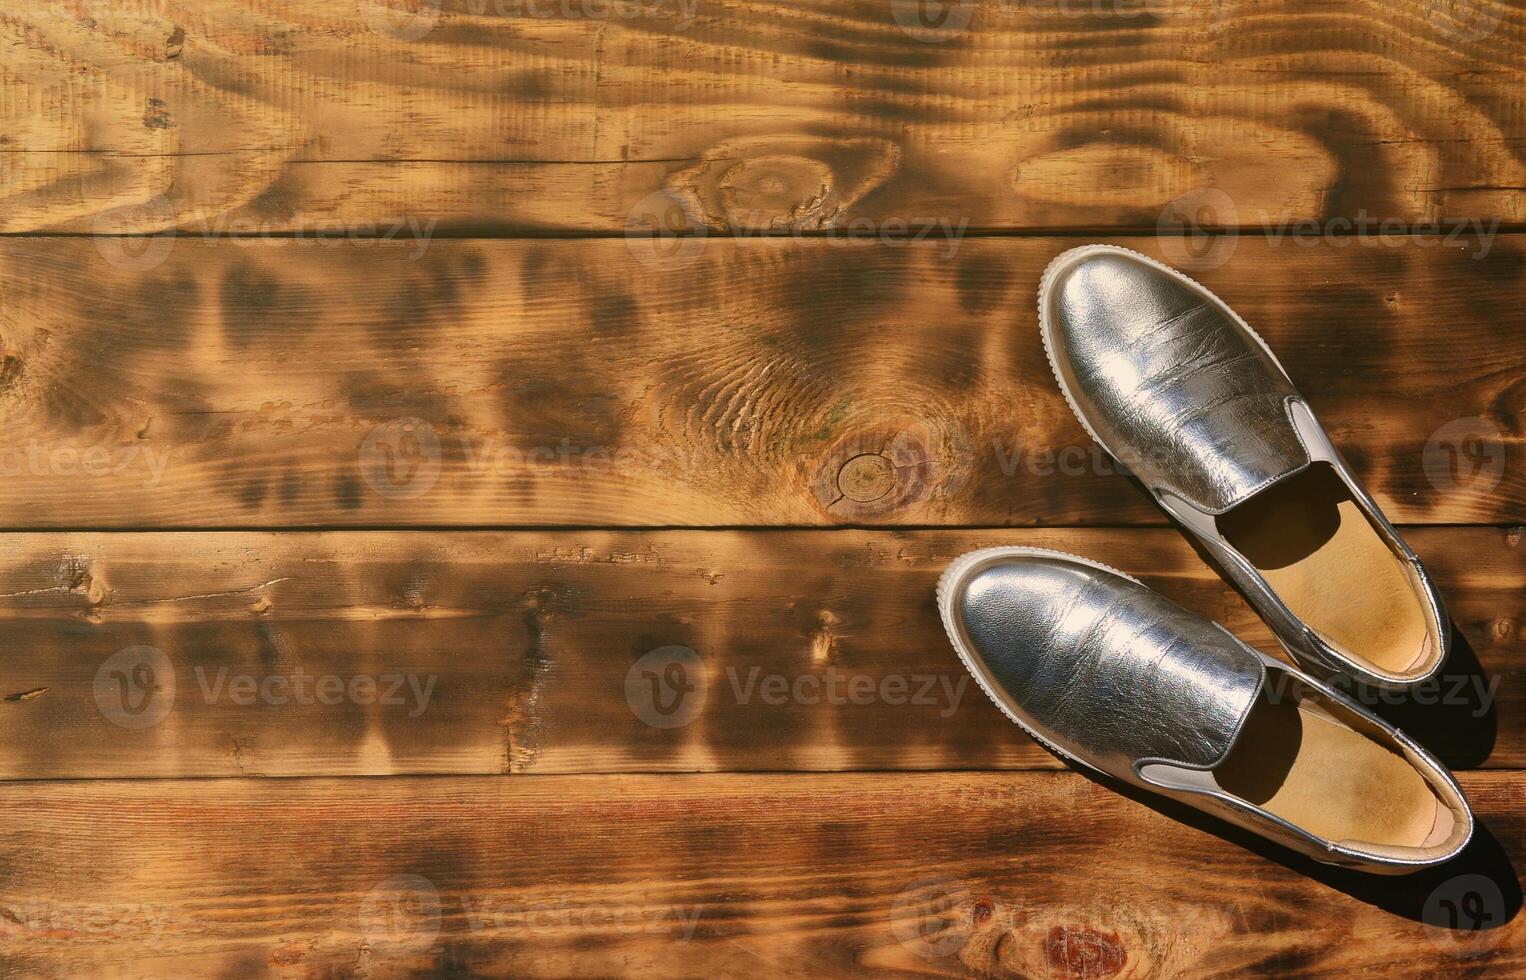 Original shiny shoes in disco style lie on a vintage wooden surface made from fried brown boards. Fashionable clothing retro accessory for discos and parties in the style of the eighties photo